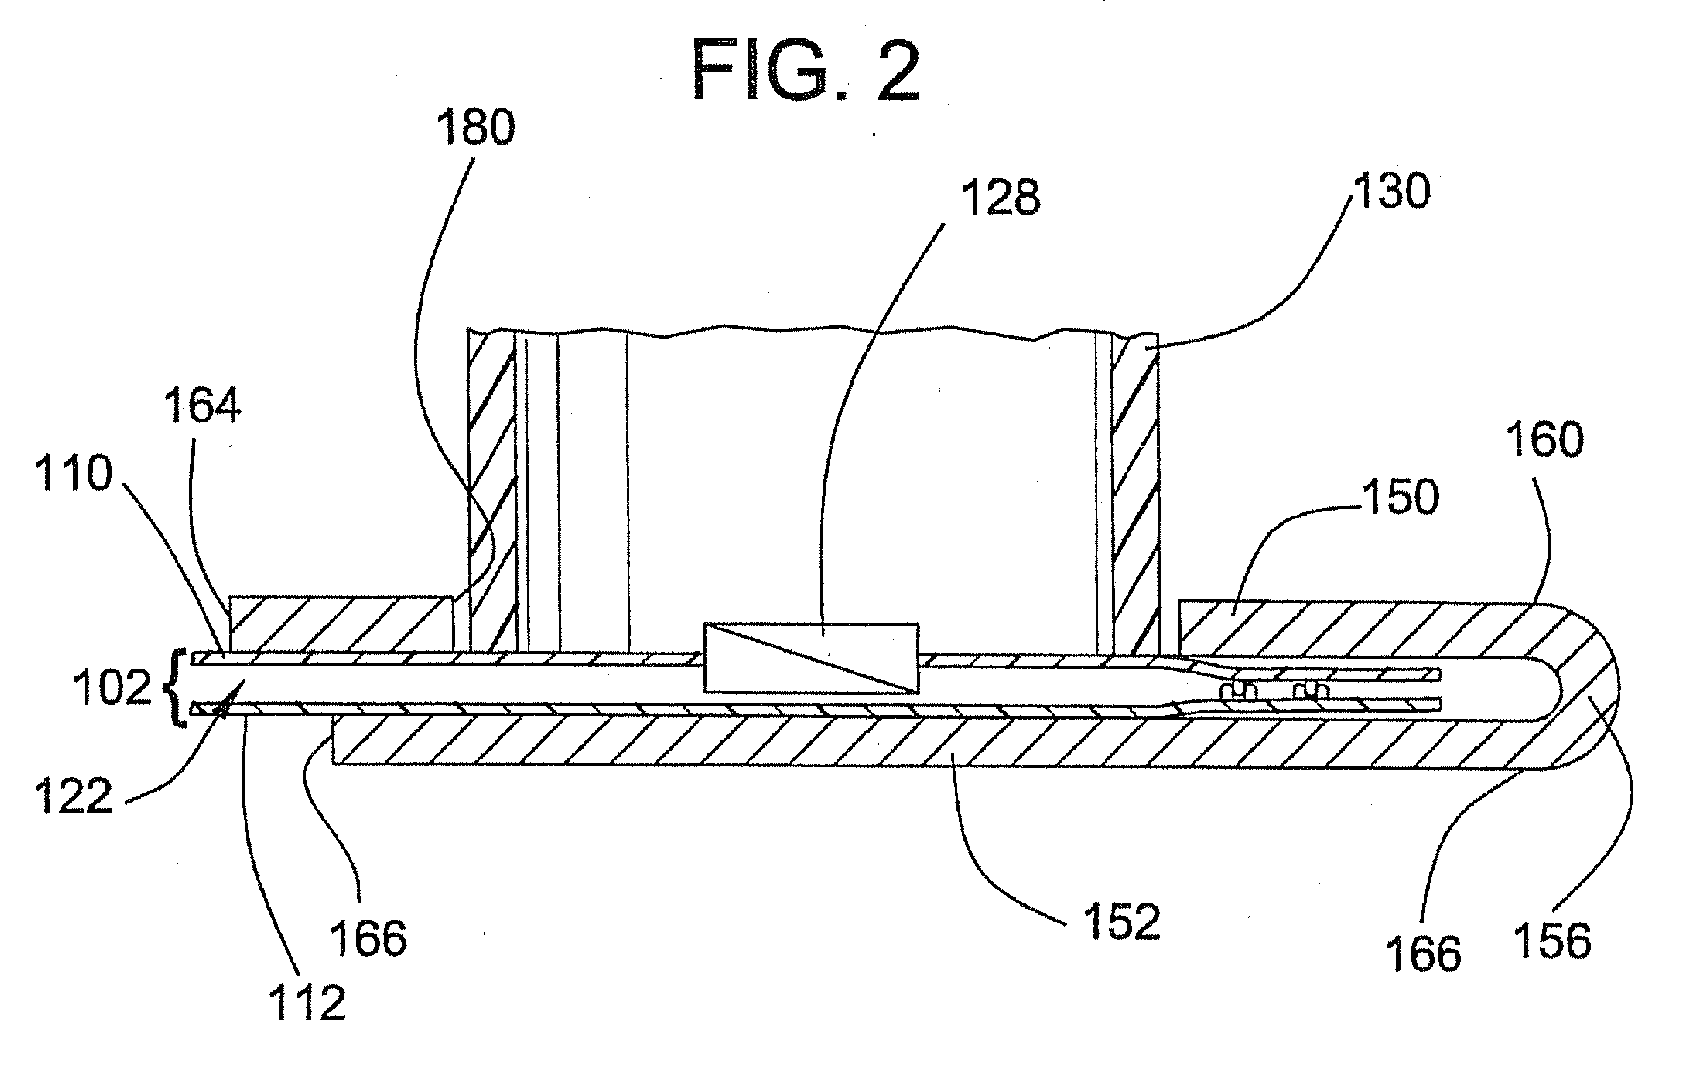 Device and Method For Evacuating A Storage Bag